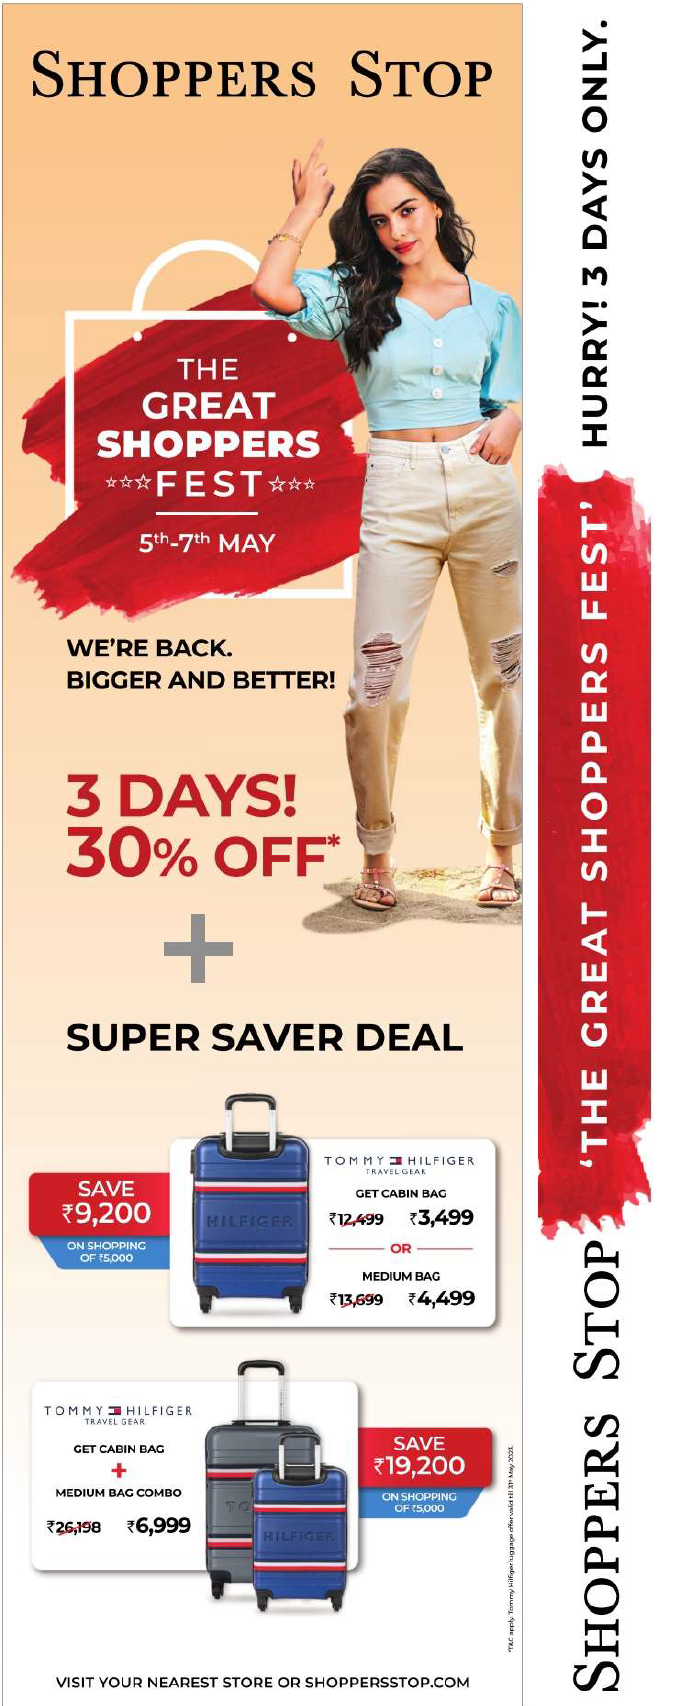 shoppers-stop-the-great-shoppers-fest-5th-7th-may-were-back-bigger-and-better-3-days-30%-off-ad-times-of-india-delhi-05-05-2023.png